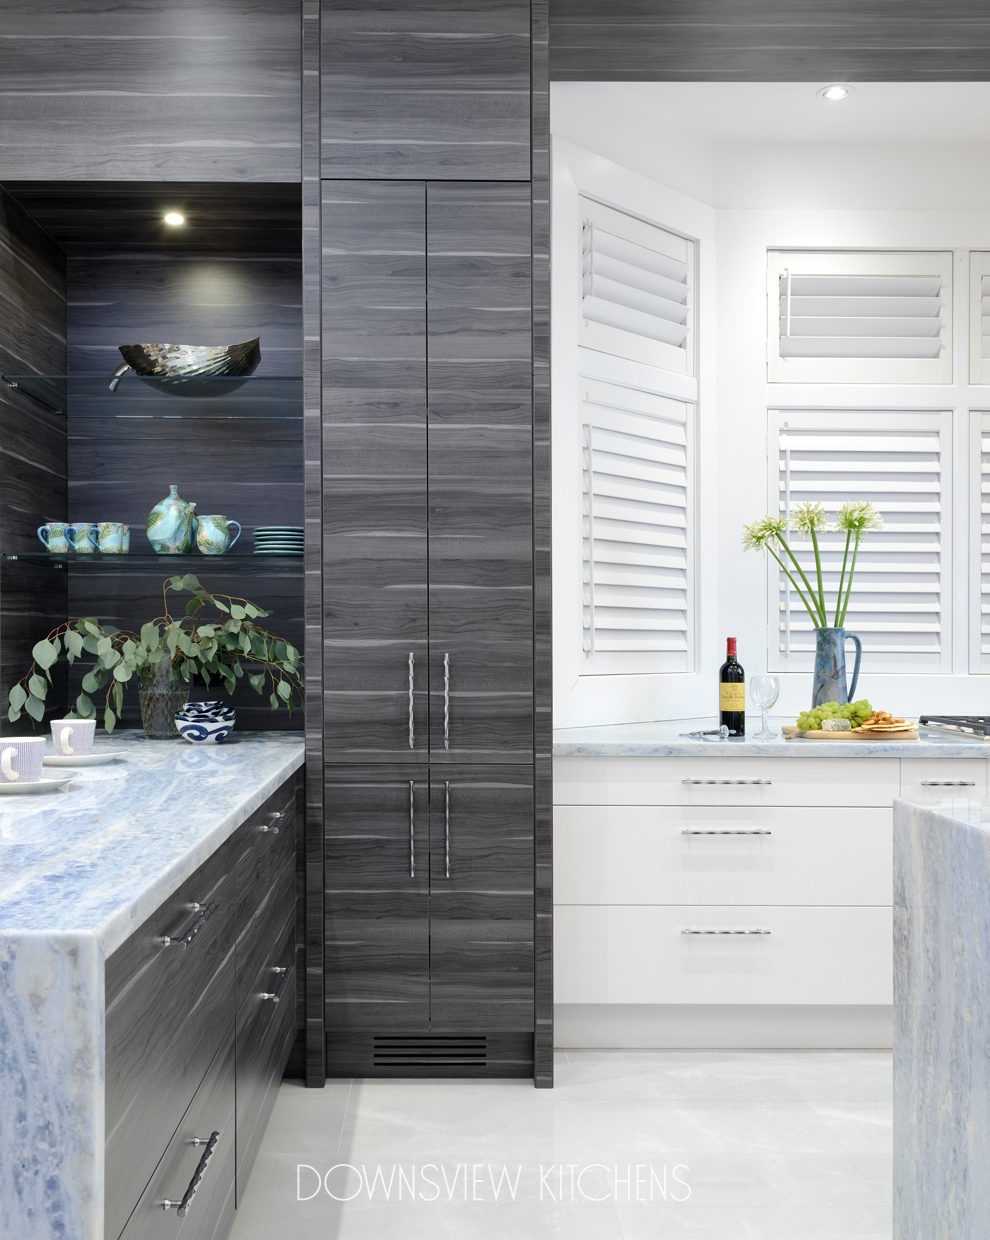 FUNCTIONAL AESTHETIC - Downsview Kitchens and Fine Custom Cabinetry